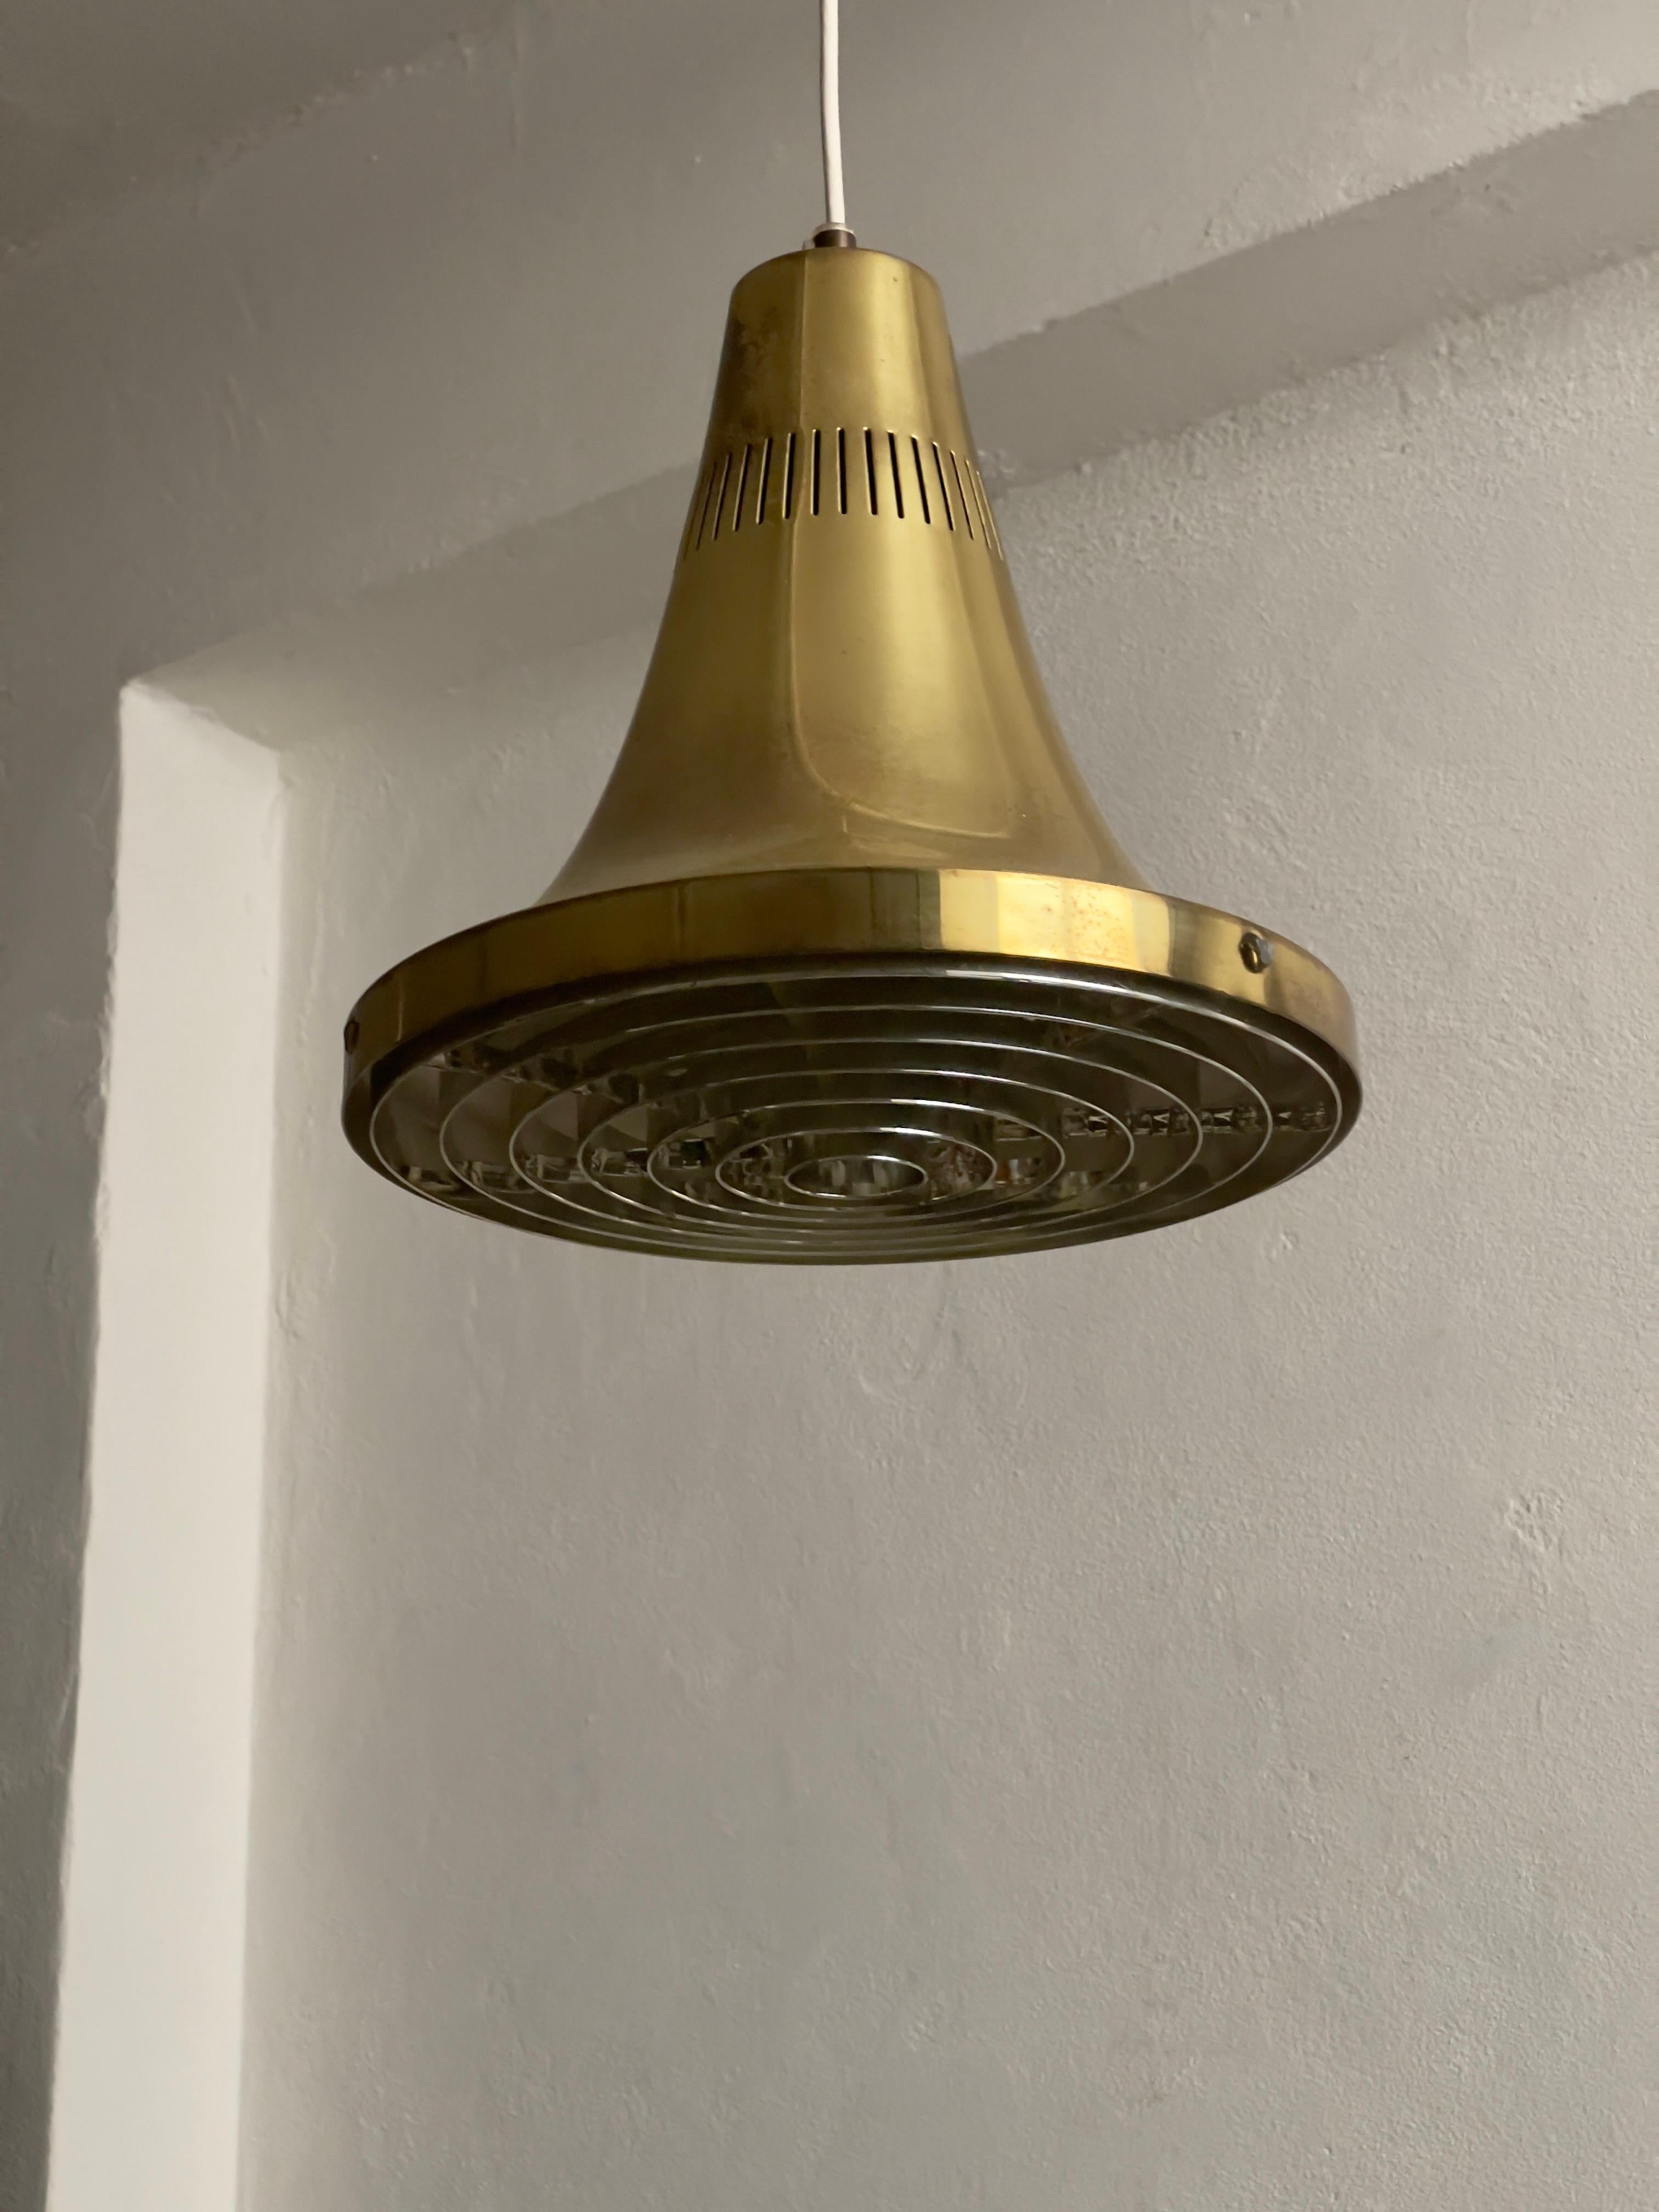 Mid-20th Century 1960s Mid-Century Modern Polished Brass Pendant by Hans Agne Jakobsson Sweden For Sale